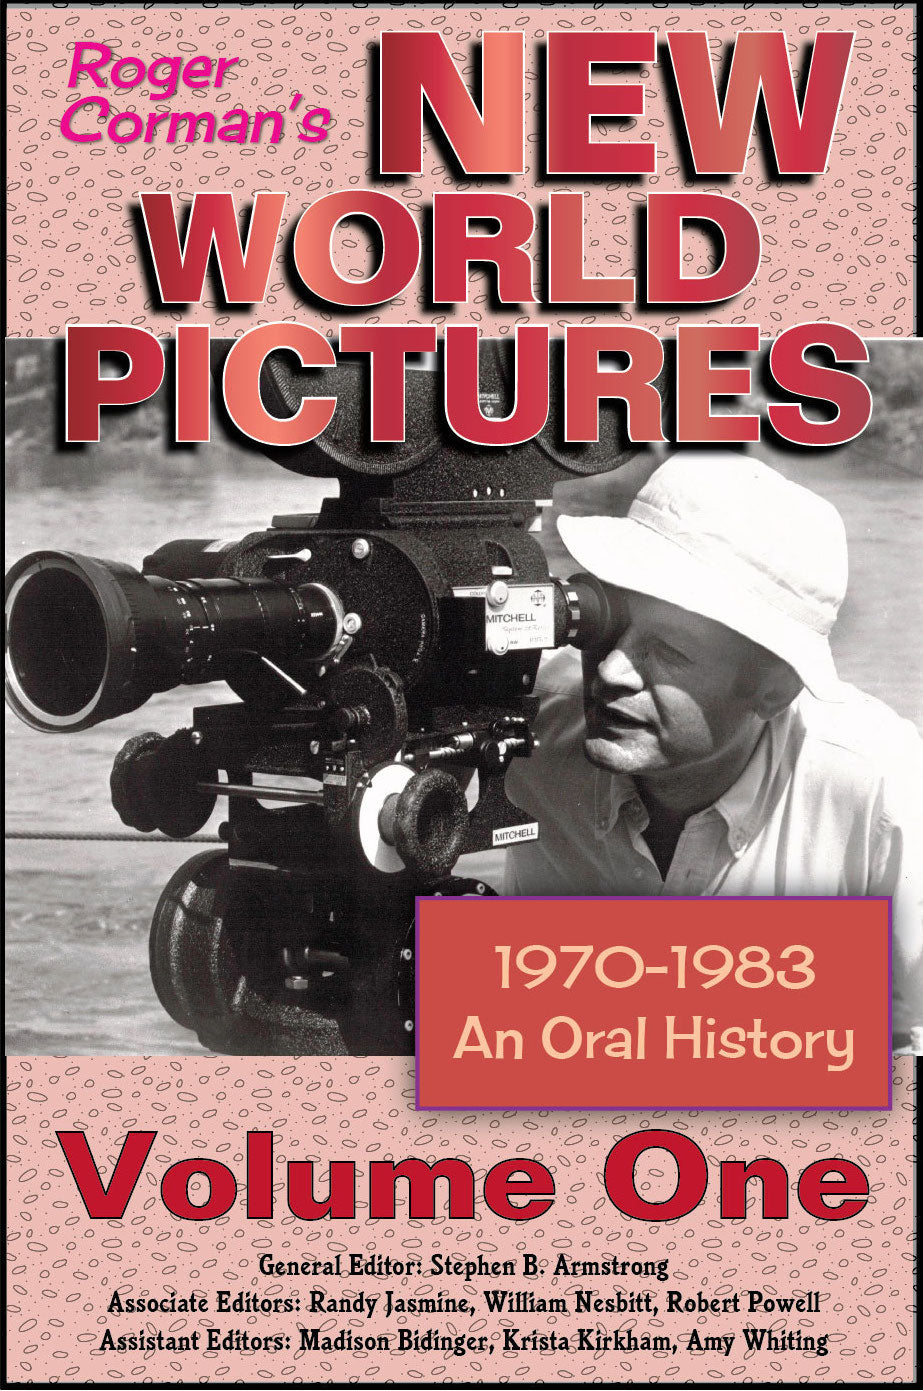 Roger Corman’s New World Pictures (1970-1983):  An Oral History Volume 1 (hardback) - BearManor Manor